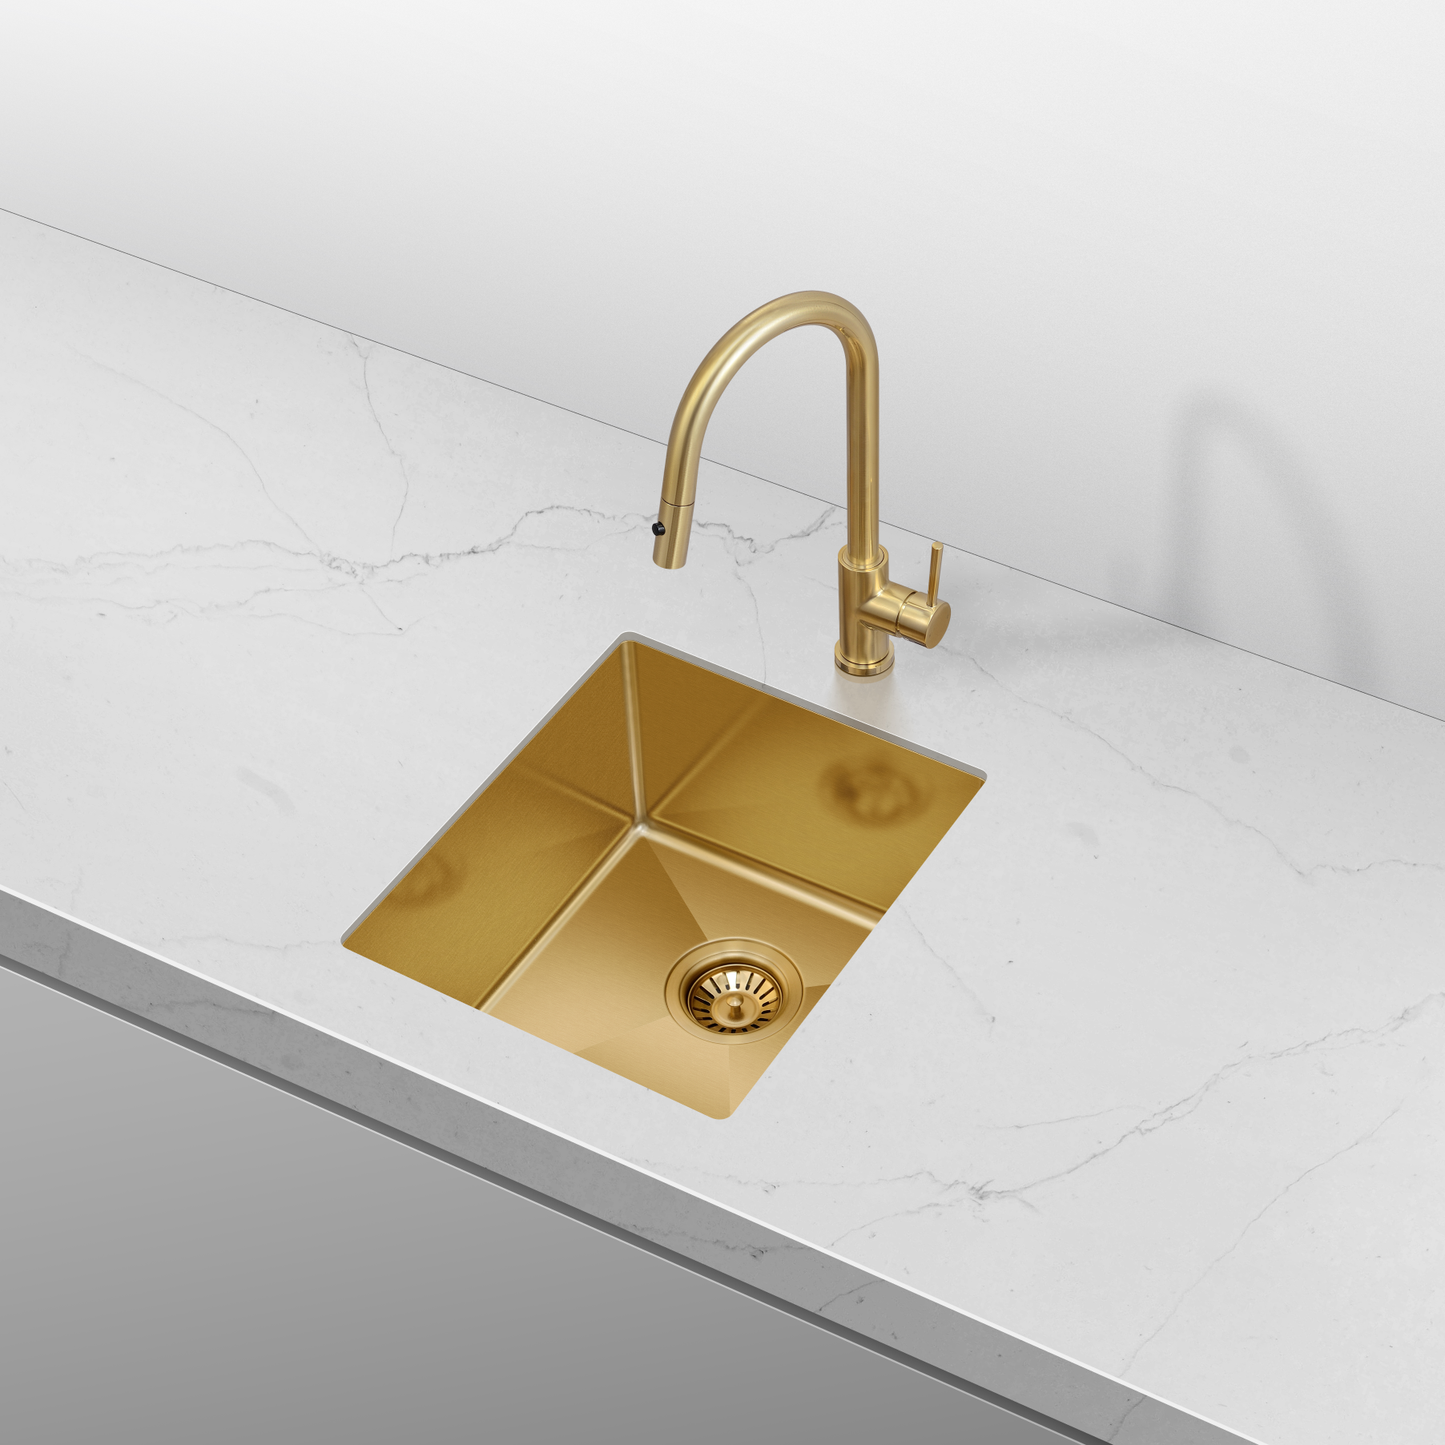 Retto 390mm x 450mm x 230mm Stainless Steel Sink | Brushed Brass (gold) |